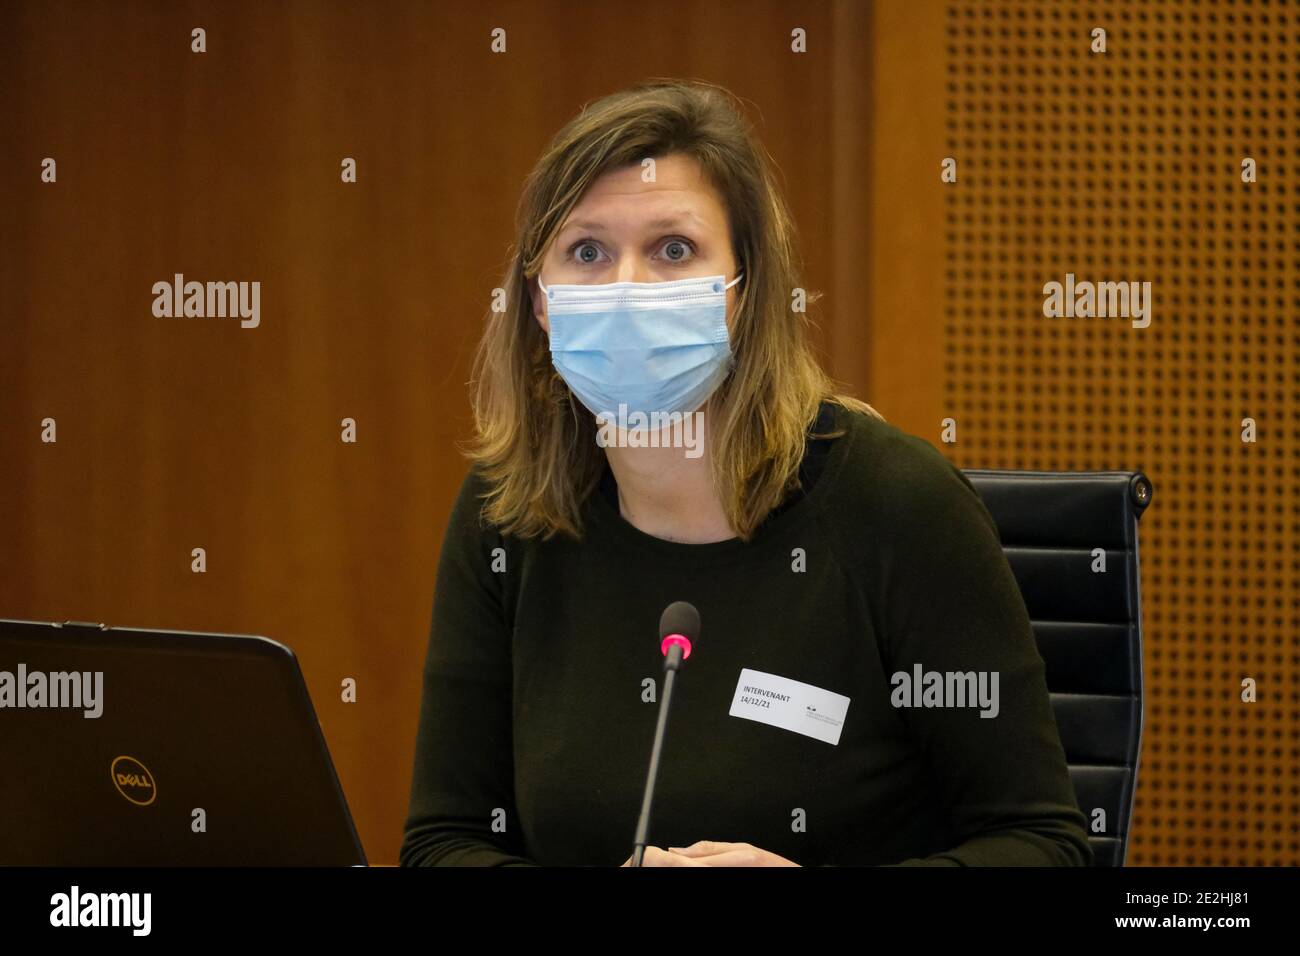 Amandine Kodeck pictured during a session of the special COVID-pandemic management commission of the parliament of the Brussels Capital Region and the Stock Photo